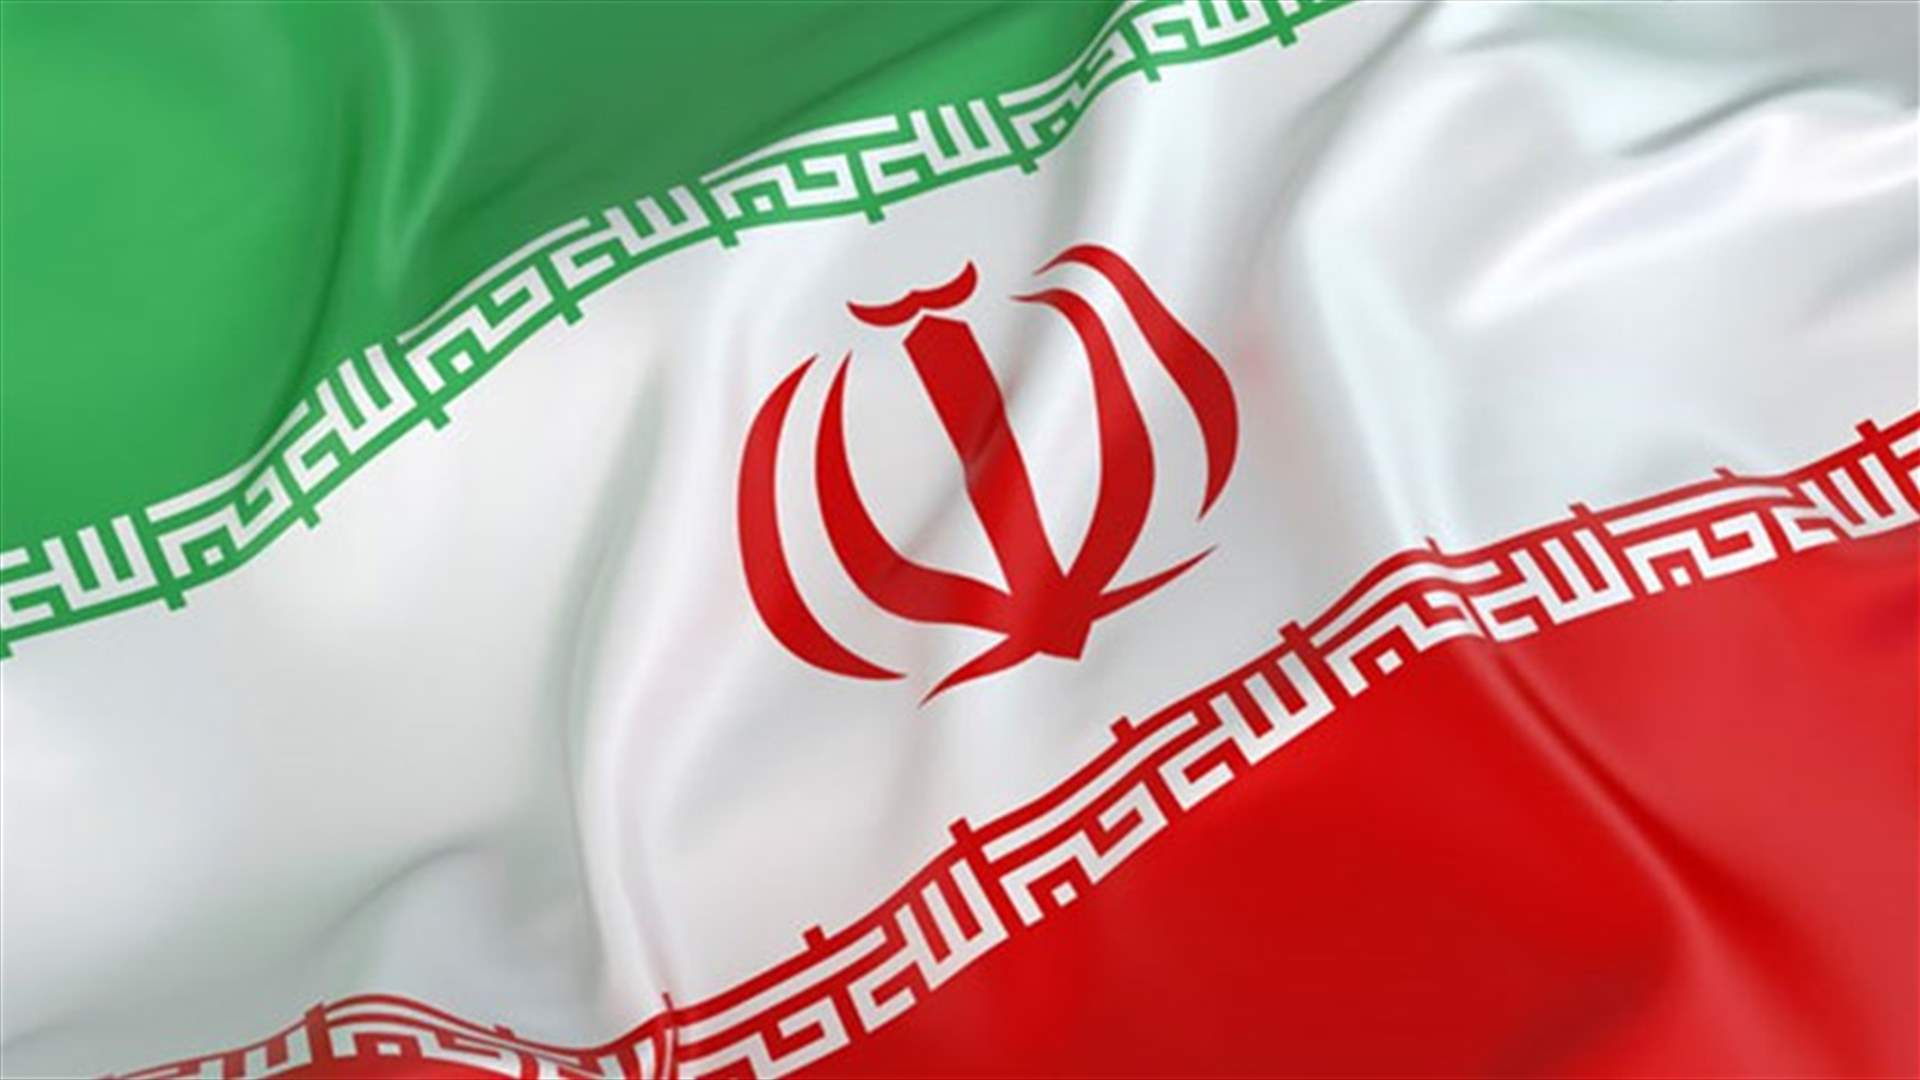 Iran says it has detained a dual national linked to British intelligence